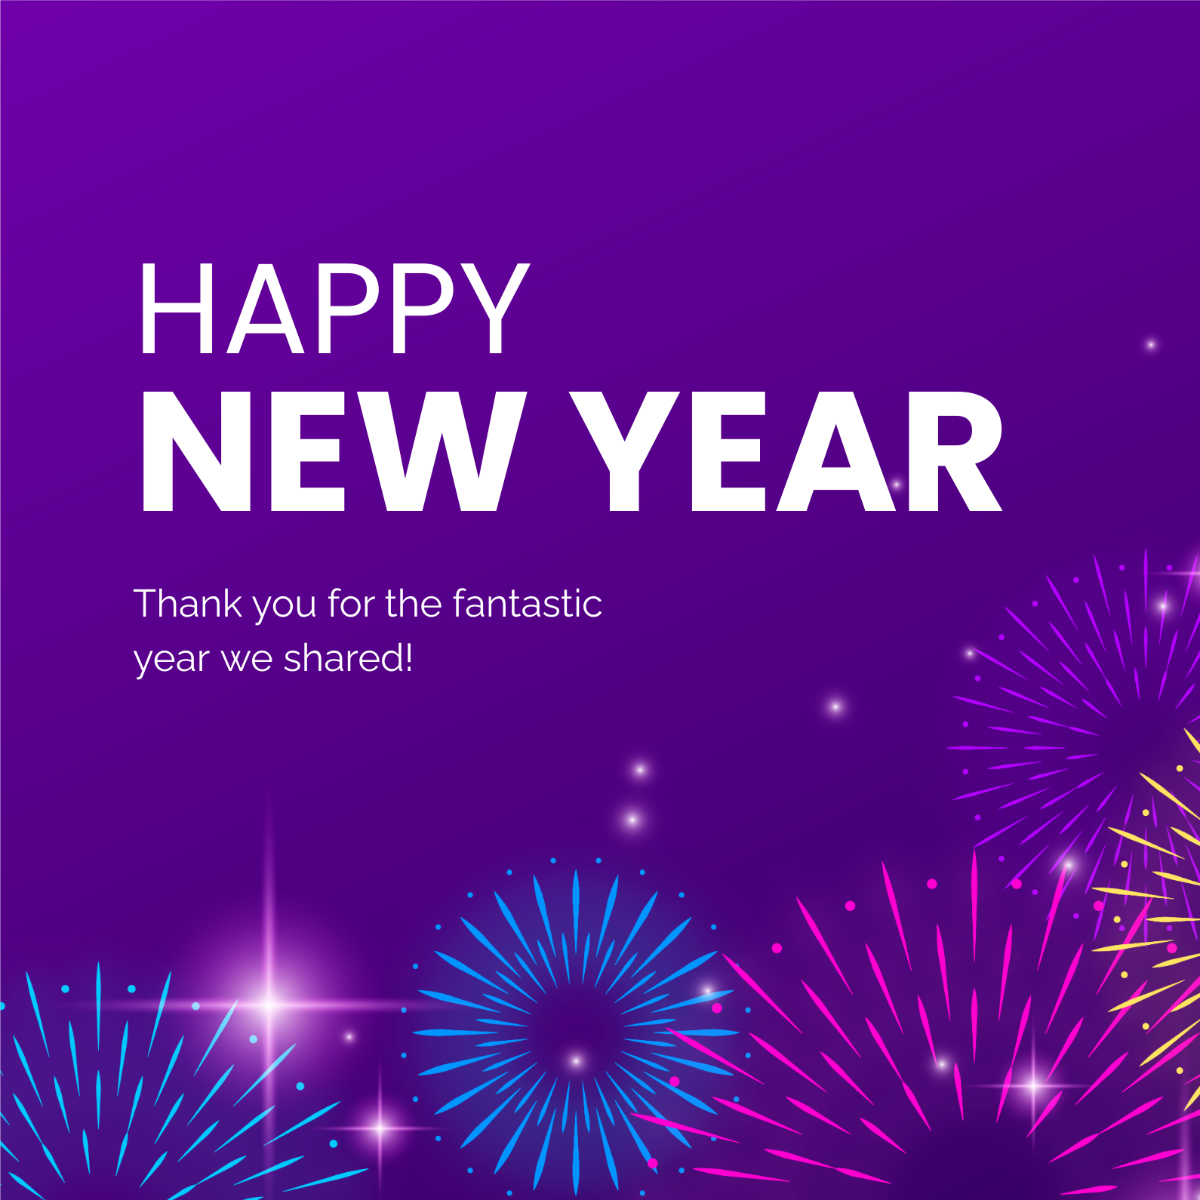 Free Corporate New Year Social Media Post Template